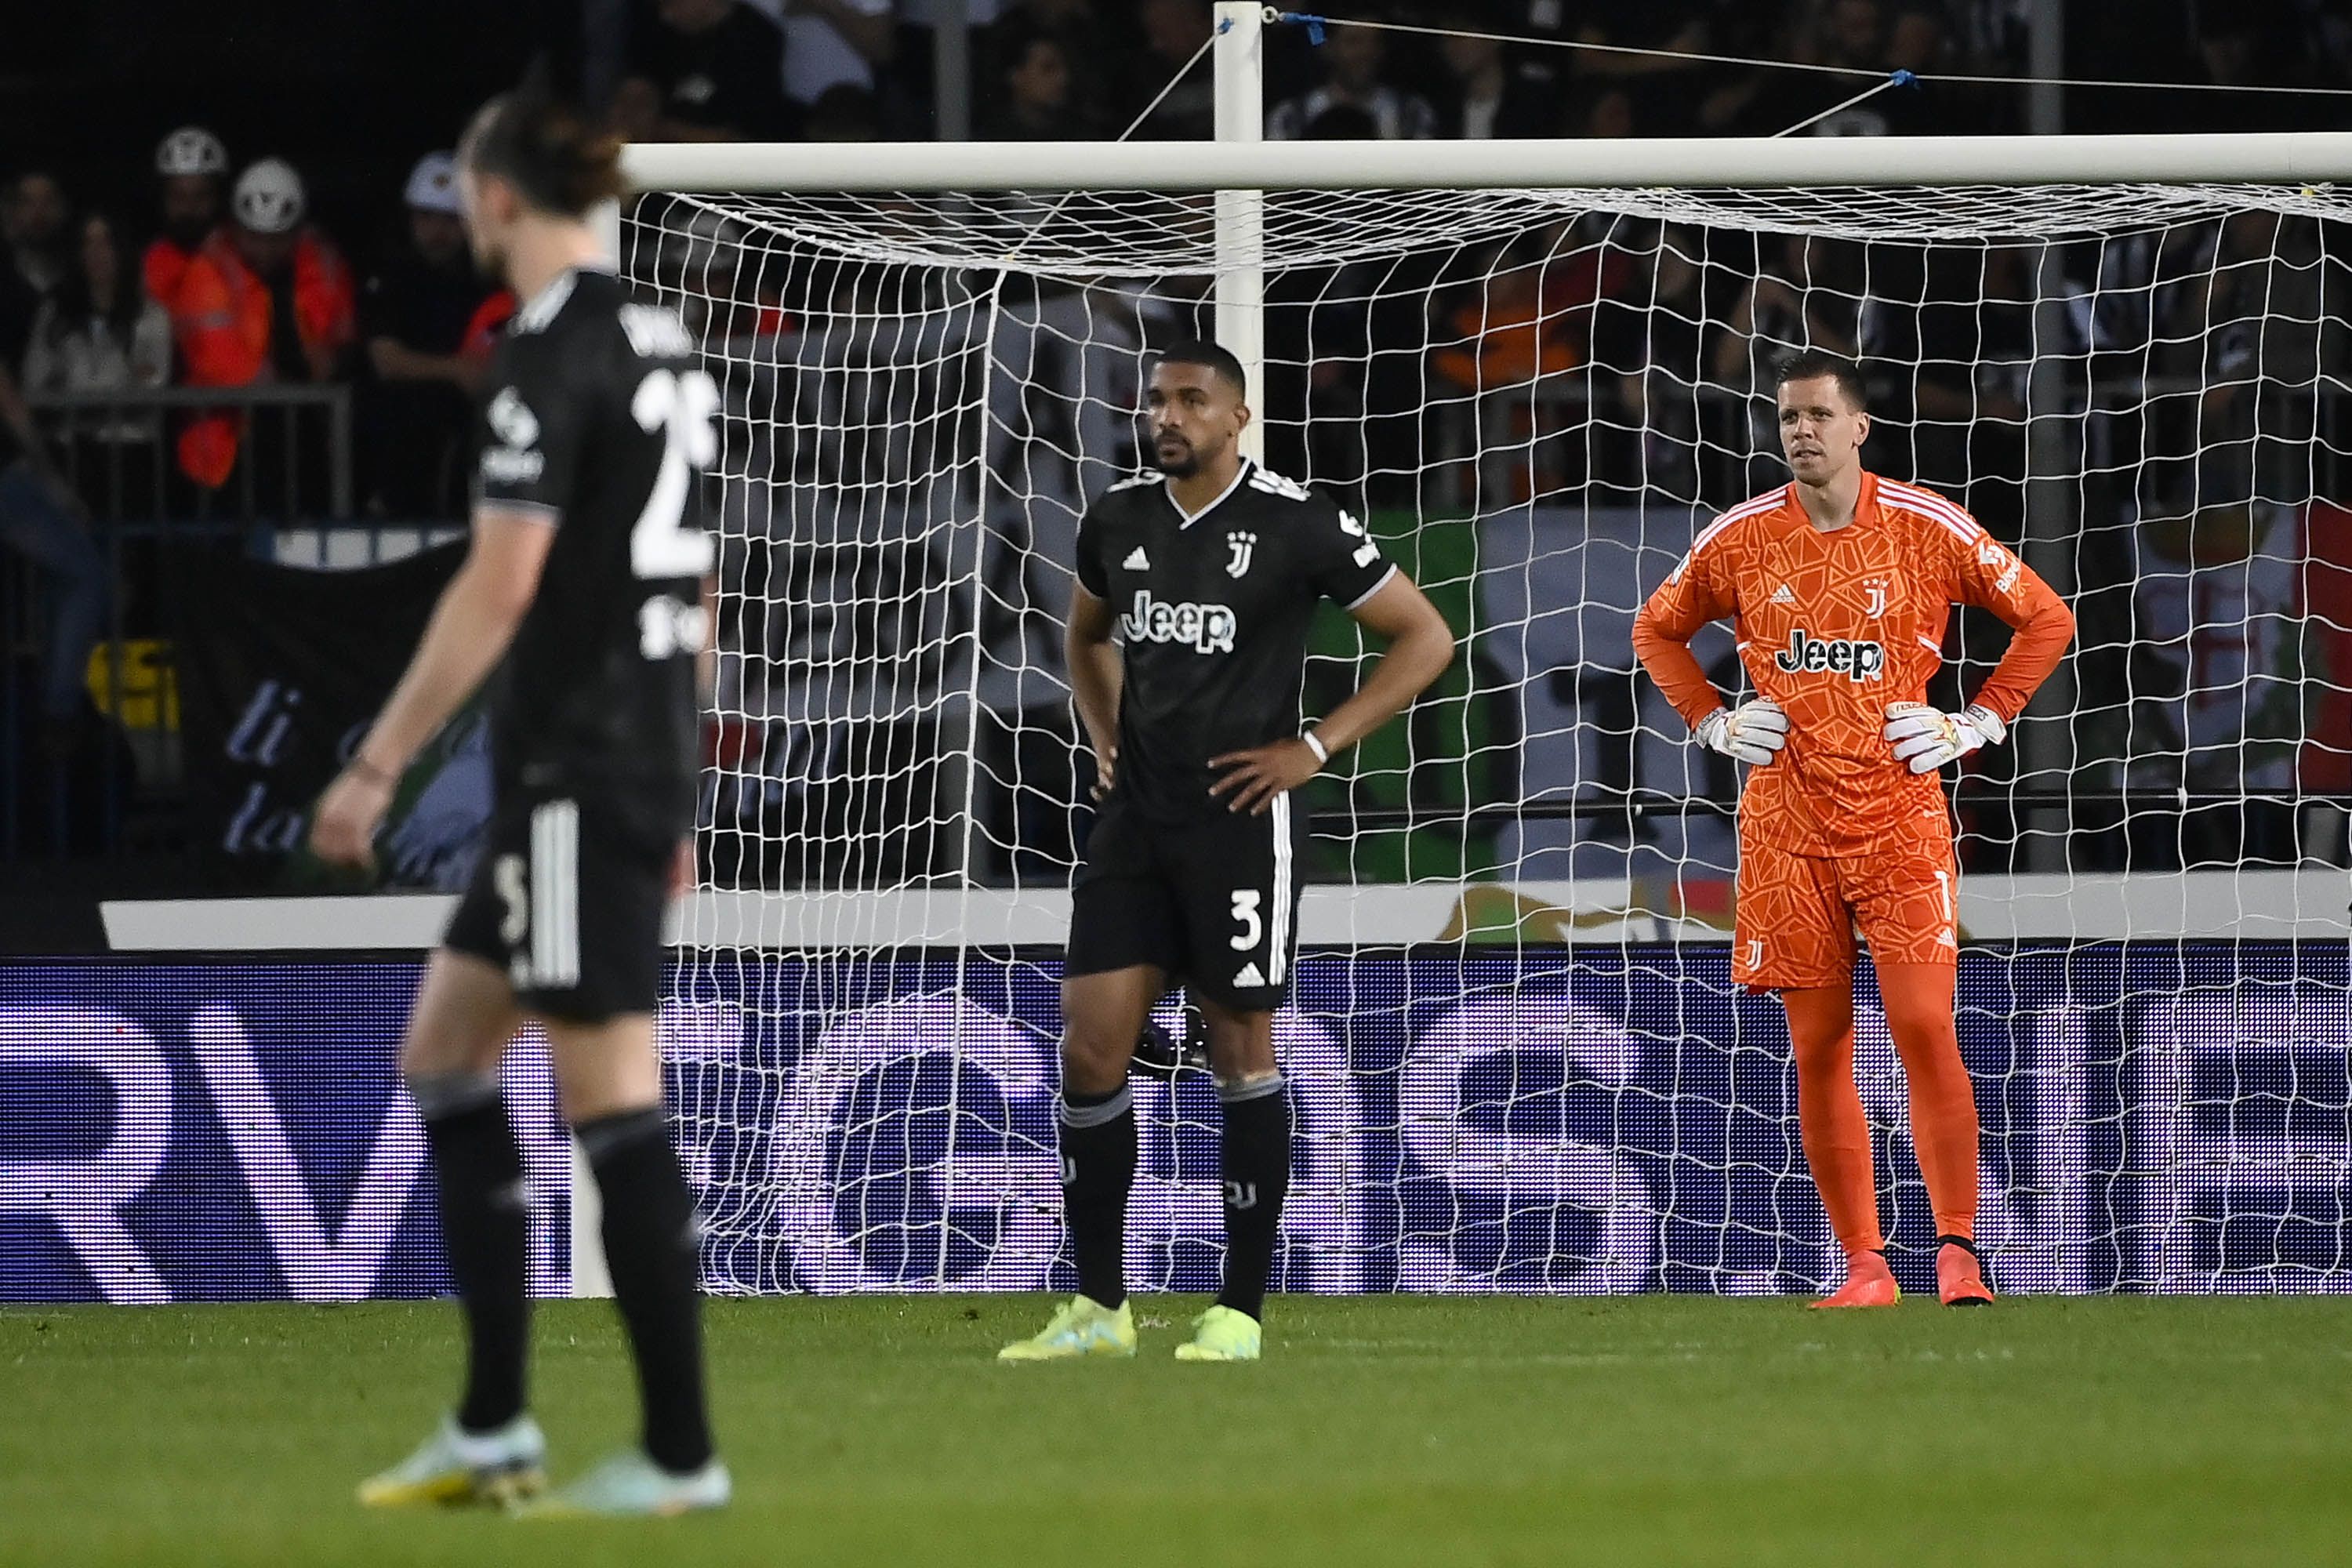 Juventus fined but avoid further points deduction in plea bargain, Football News